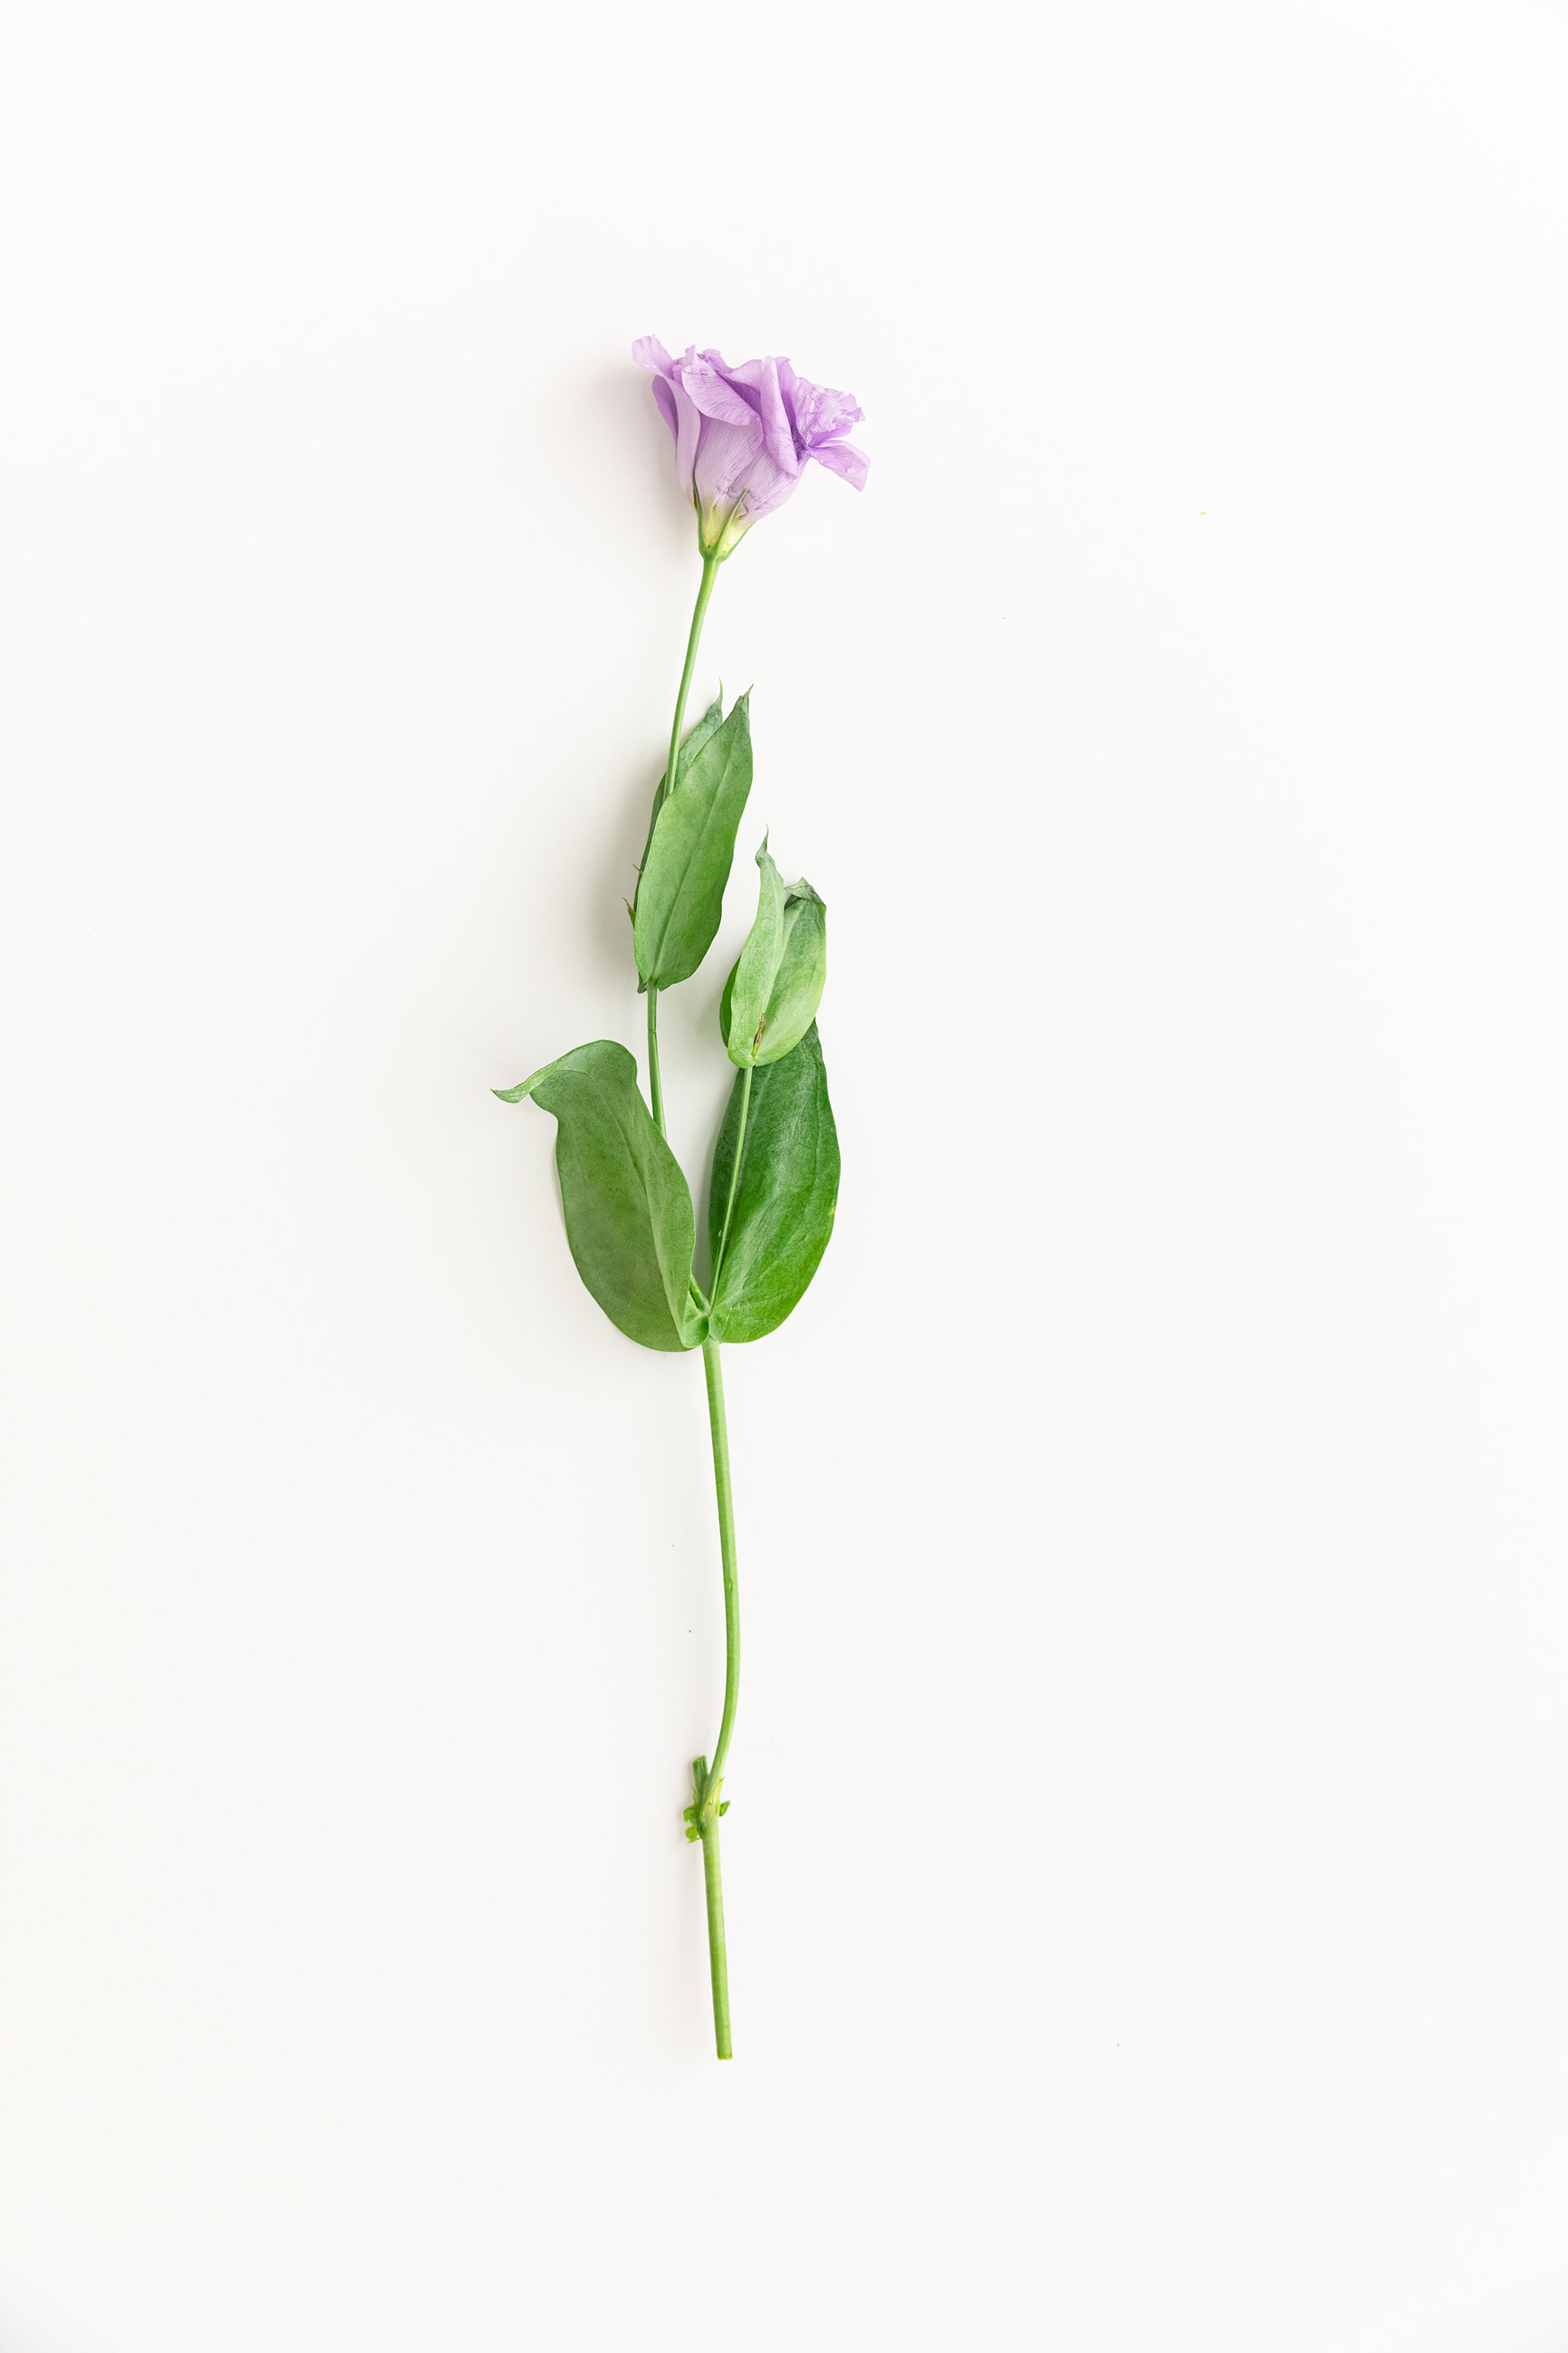 Twig of little purple flowers on white background